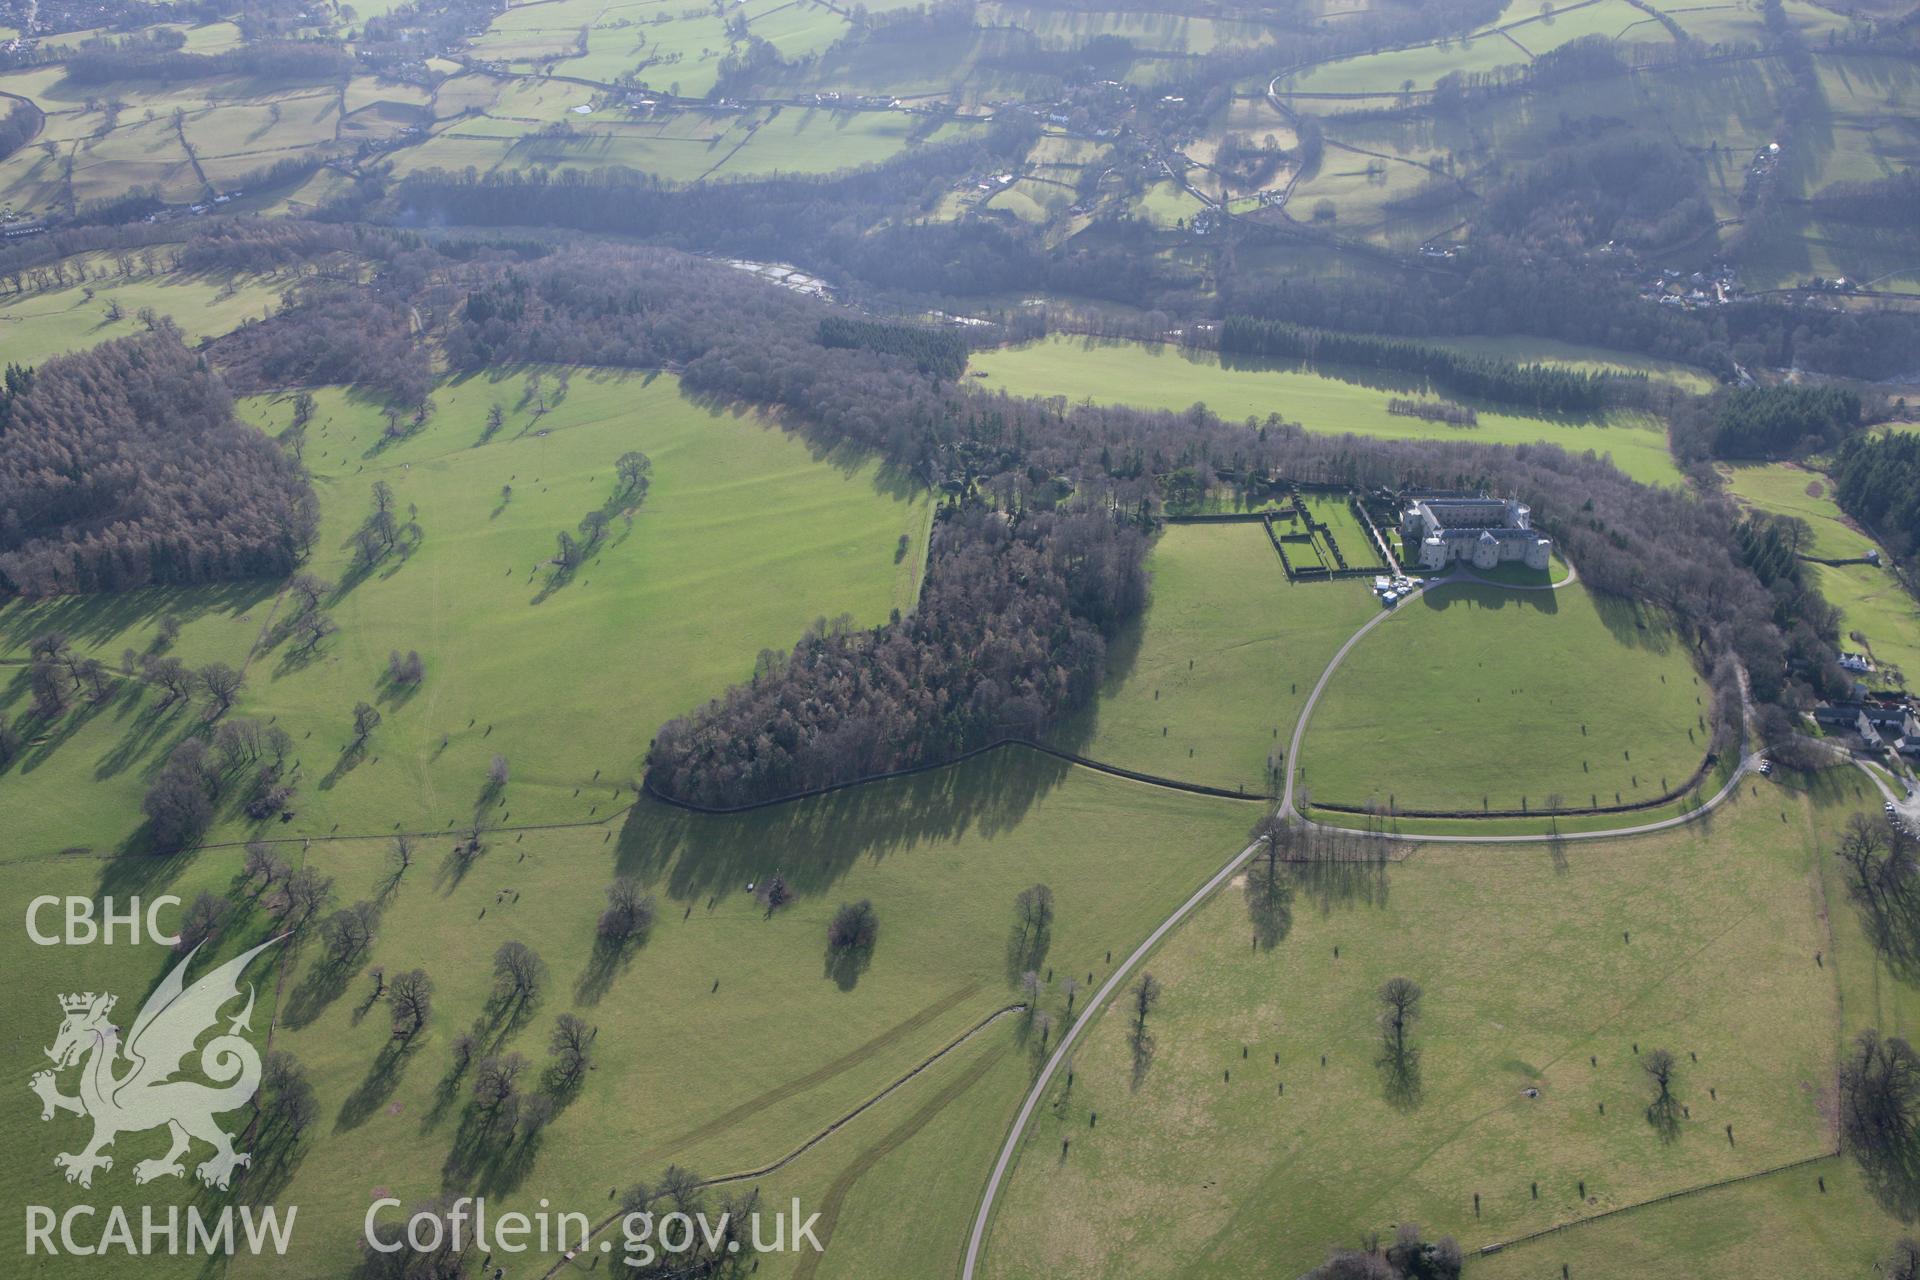 RCAHMW colour oblique photograph of earthworks to the east of Chirk Castle. Taken by Toby Driver on 08/02/2011.